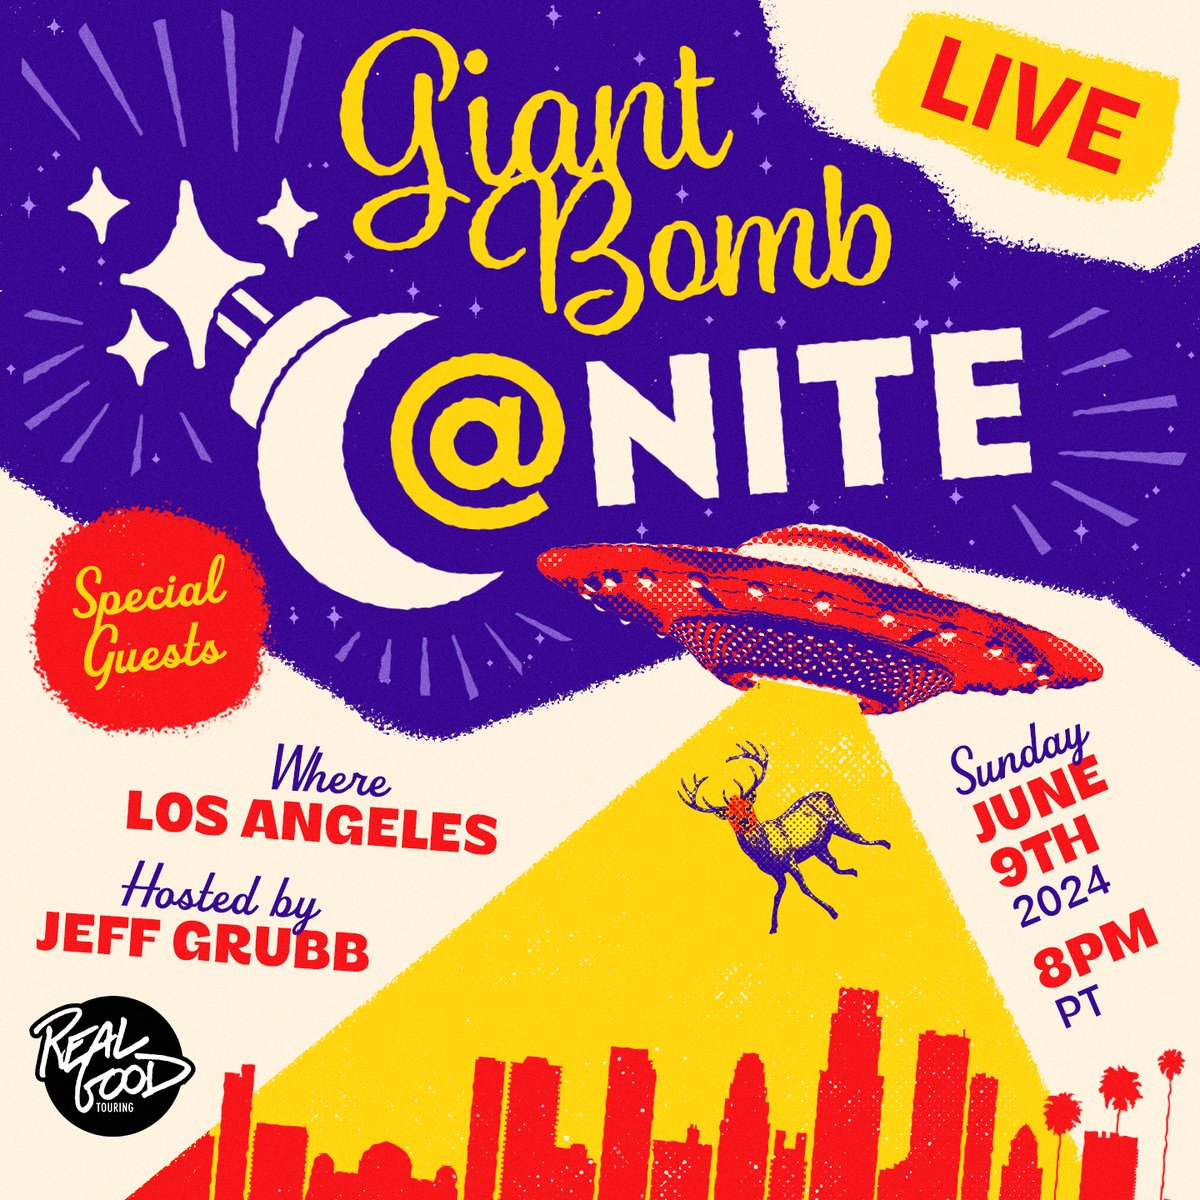 Calling all LA dwellers 📣 Grab your ticket to @giantbomb @ Nite, live from @TheBellwetherLA on June 9 ➡️ bit.ly/giantbombatnite